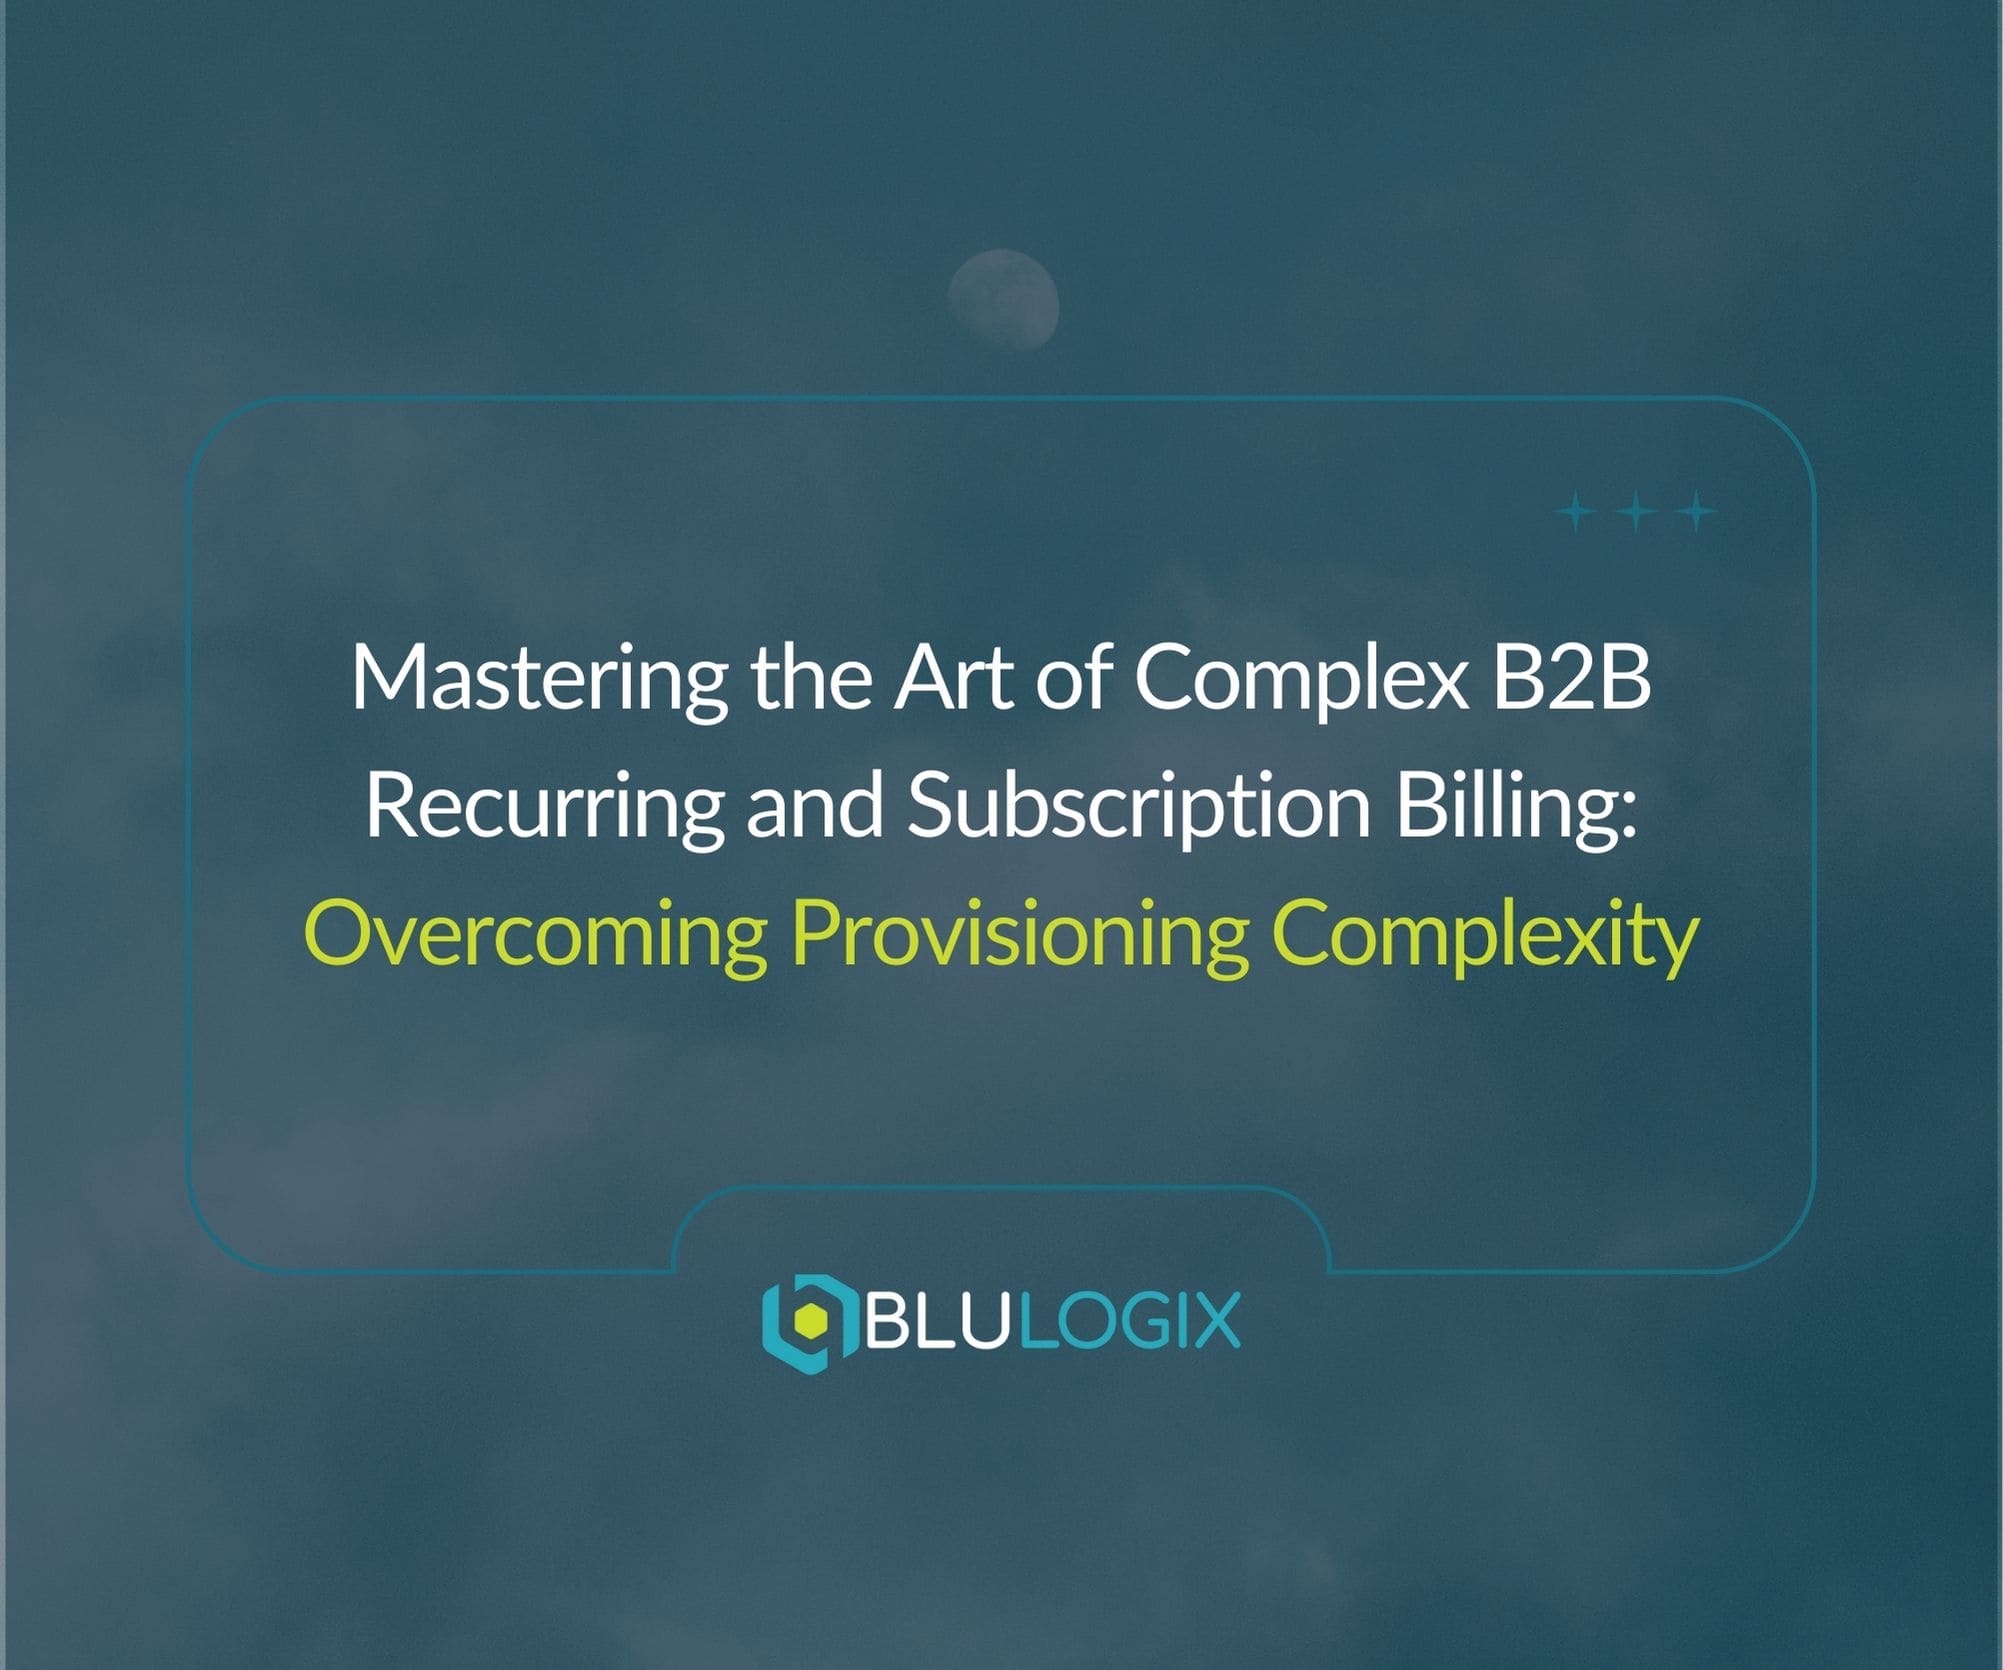 Mastering the Art of Complex B2B Recurring and Subscription Billing Overcoming Provisioning Complexity